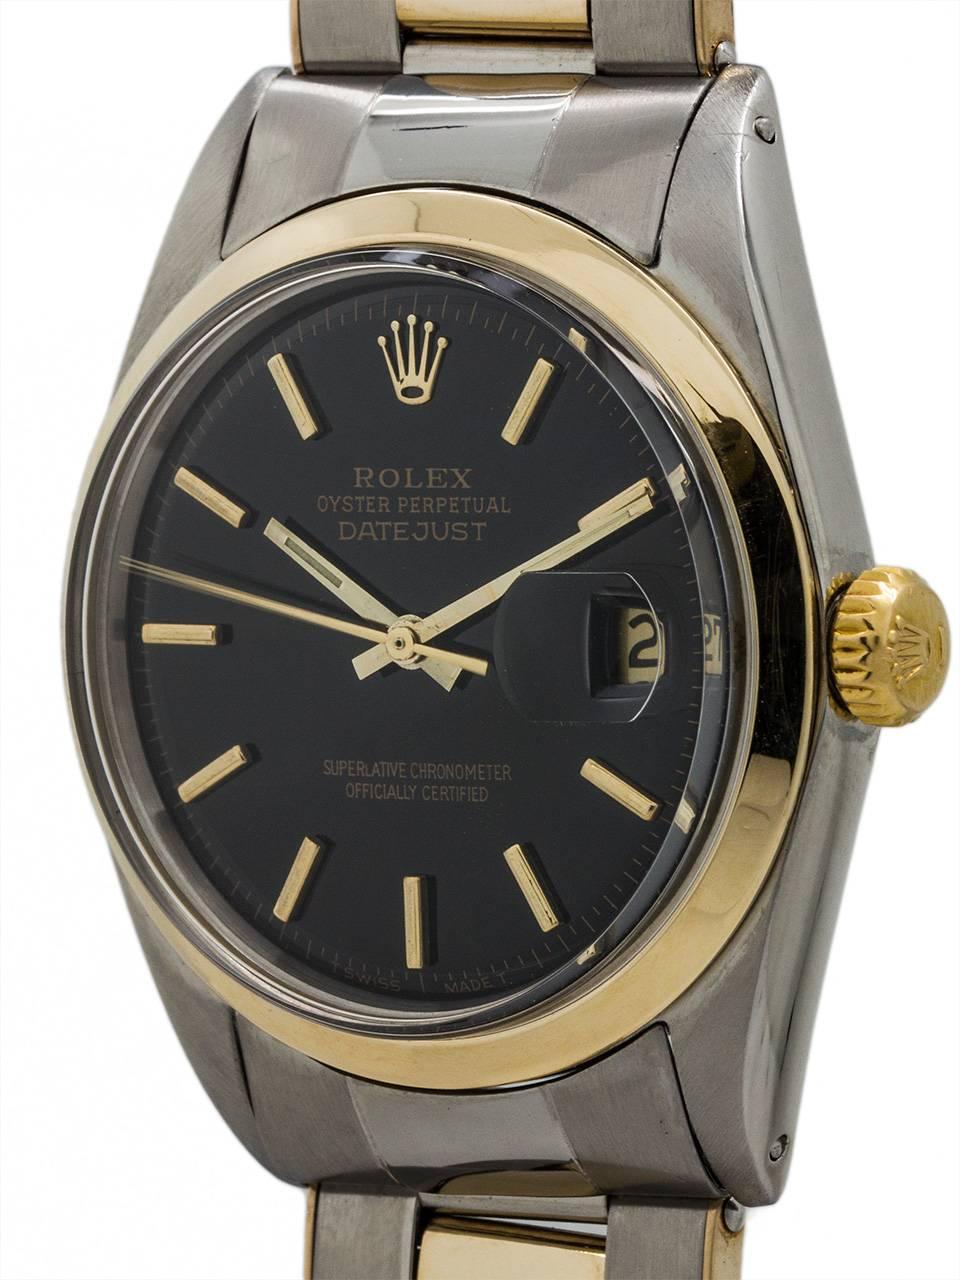 Vintage Rolex Datejust ref 1600 stainless steel and 14K gold, case serial # 1.5 million circa 1966 with original riveted link SS/14K YG Oyster bracelet. Featuring 36mm diameter stainless steel case with smooth 14K gold bezel, acrylic crystal, and